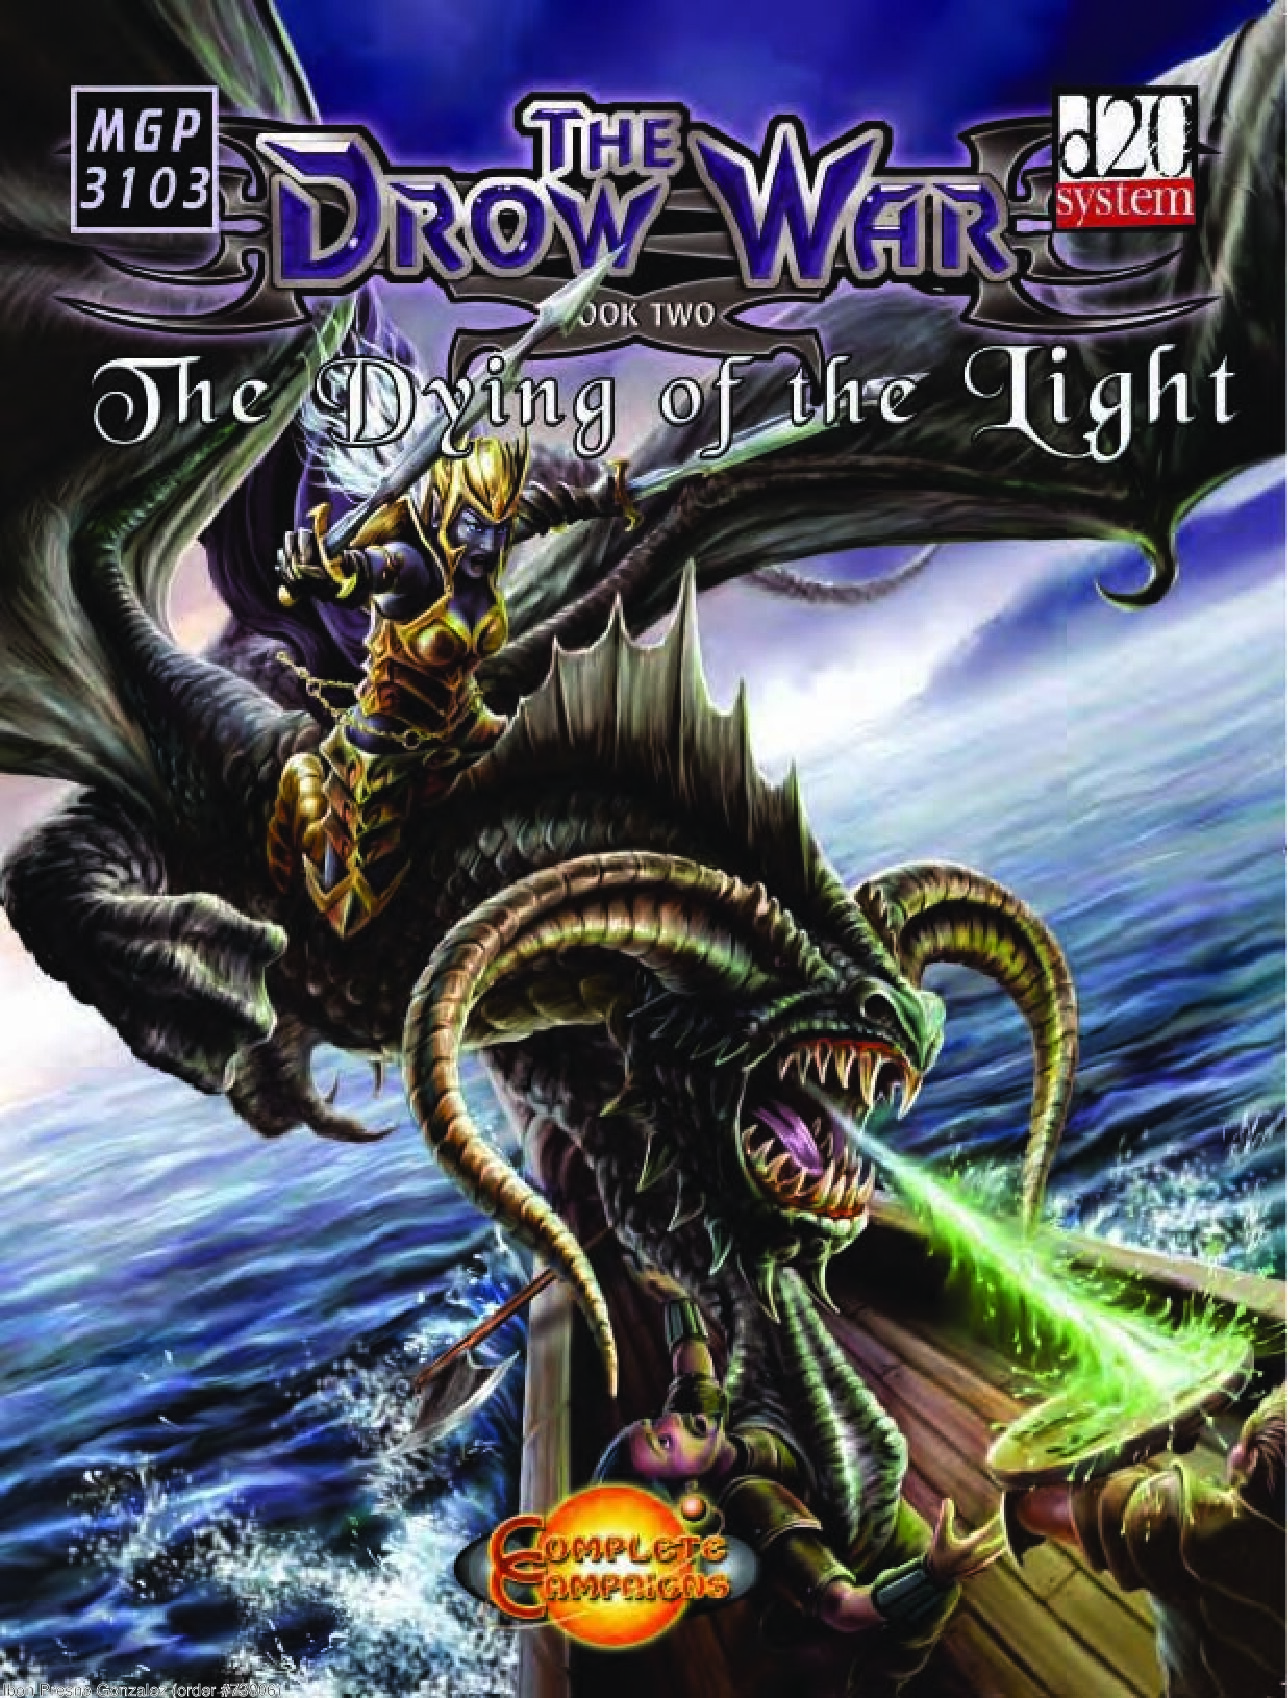 The Drow War Book Two. The Dying Of The Light